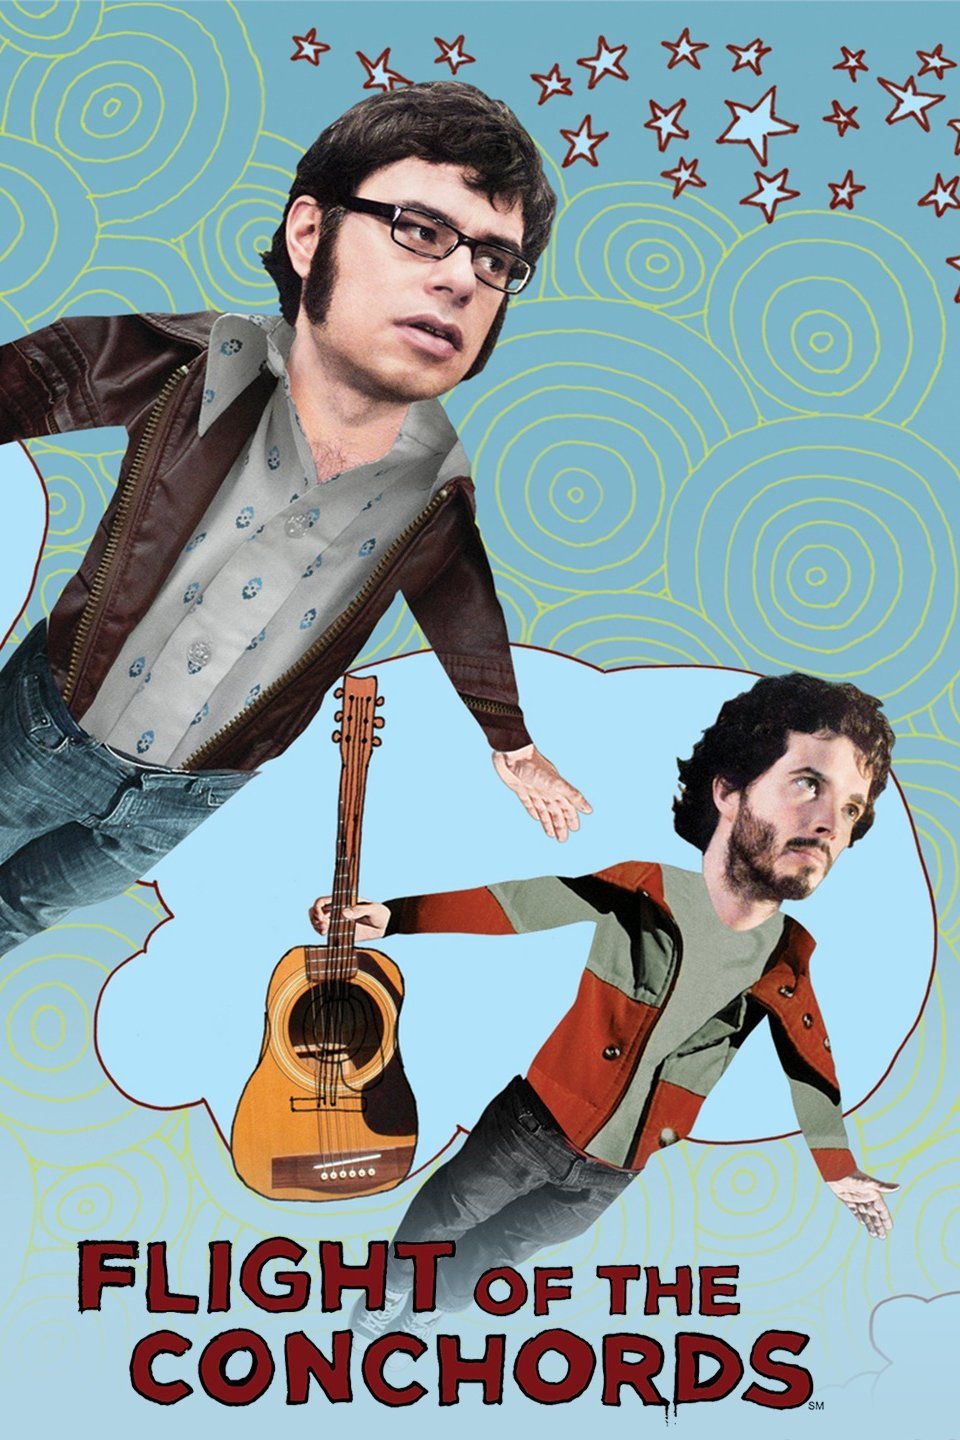 Flight of the Conchords Pictures and Photo Gallery -- Check out just releas...